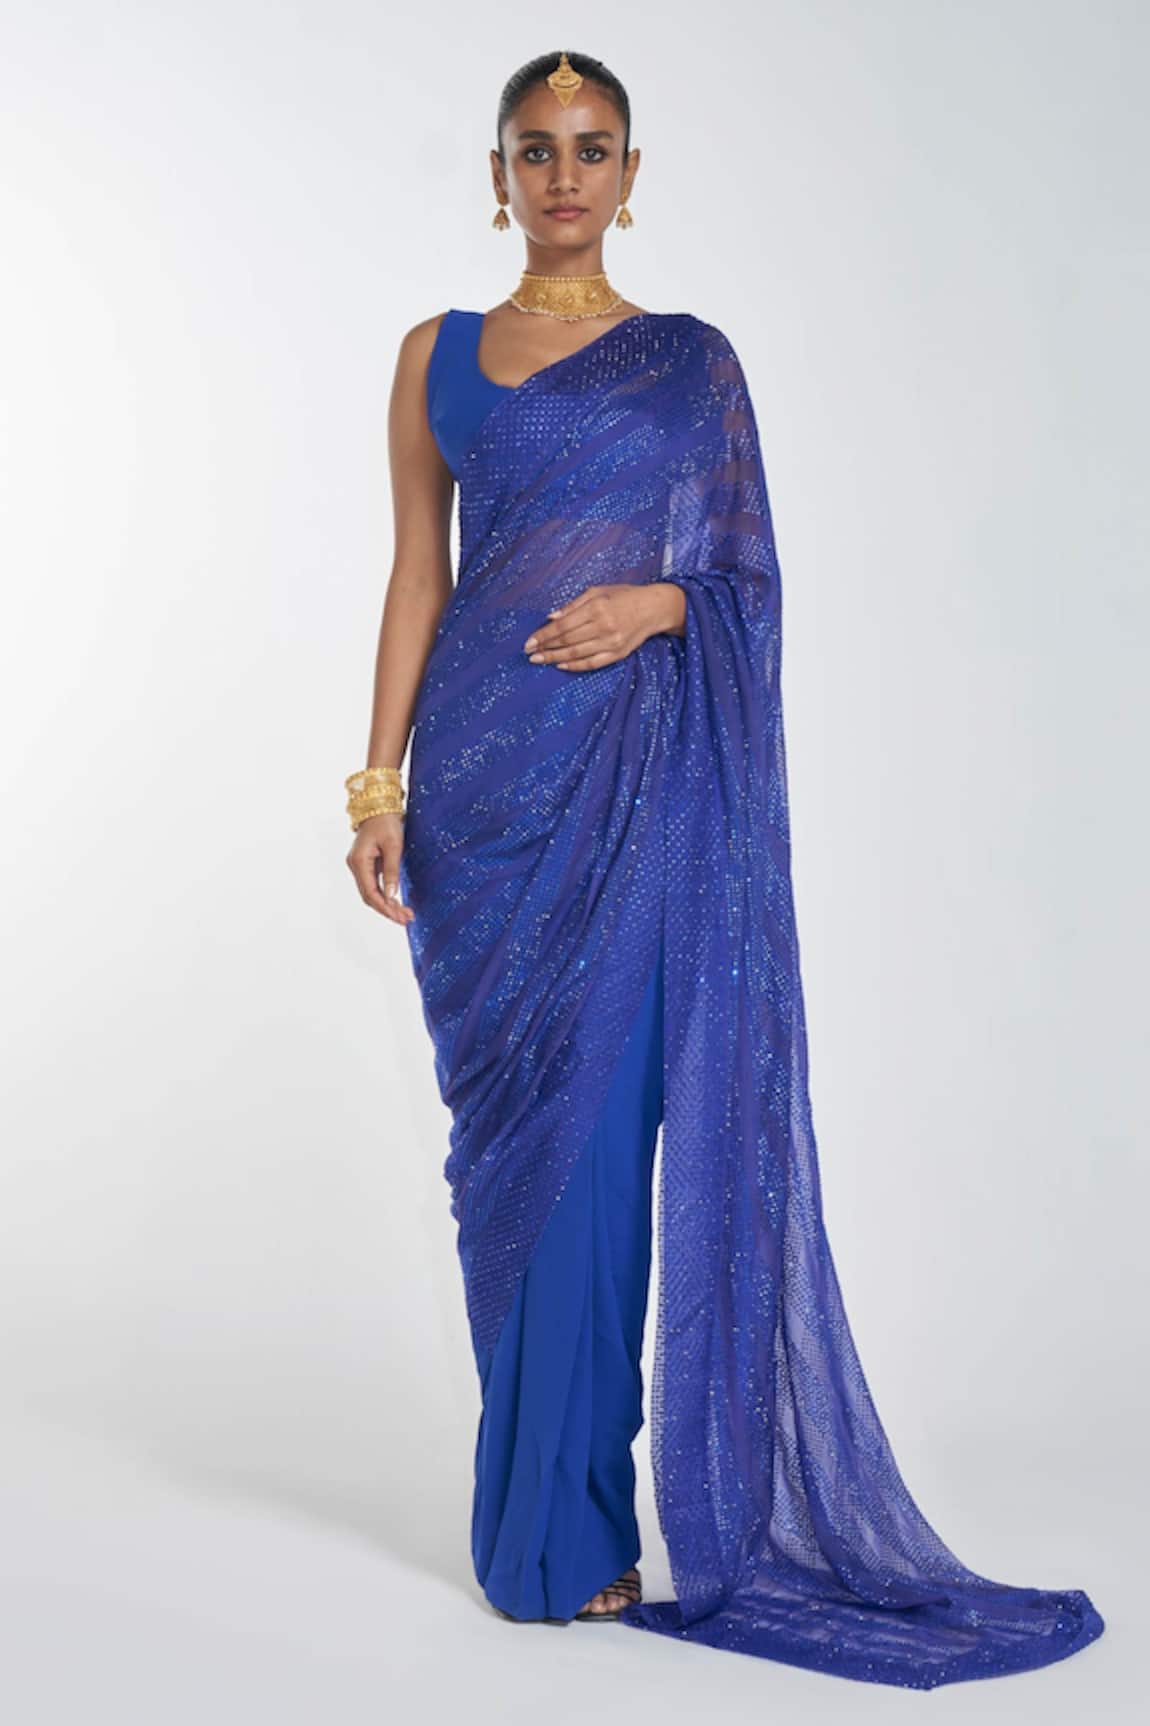 Itrh Crystal Pre-Draped Saree With Blouse